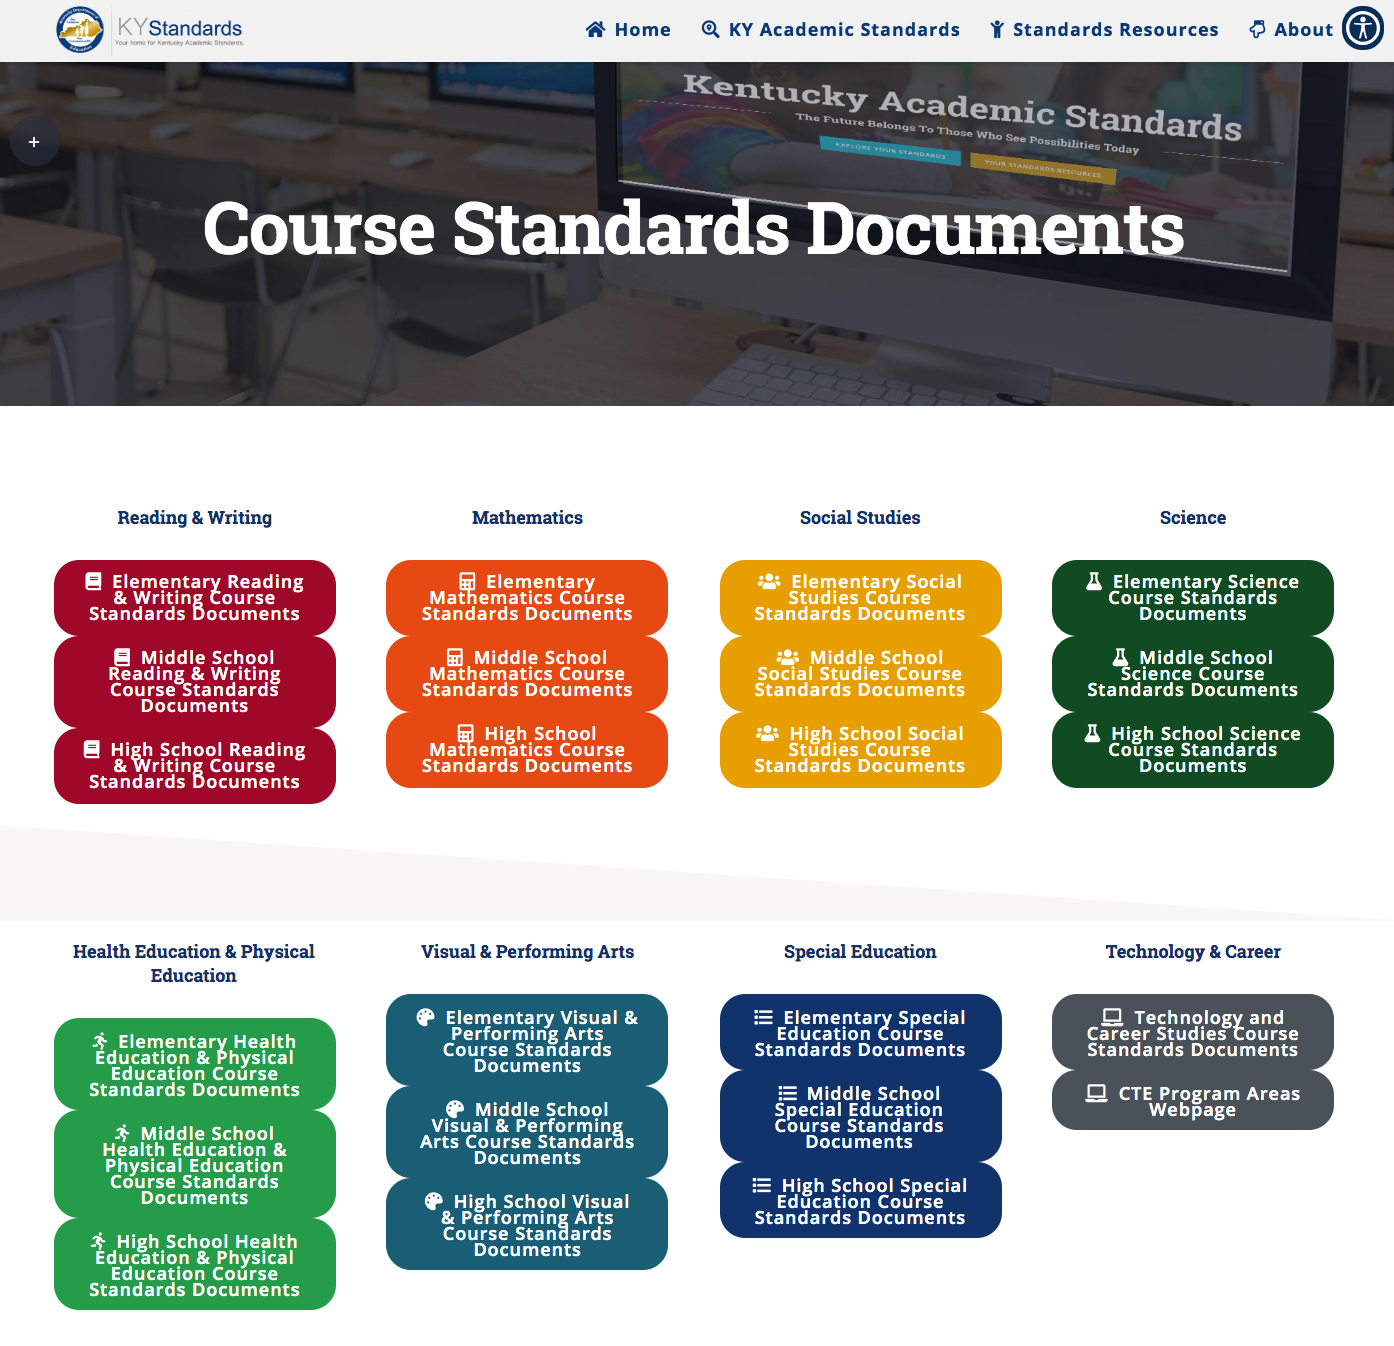 Course Standards Documents webpage